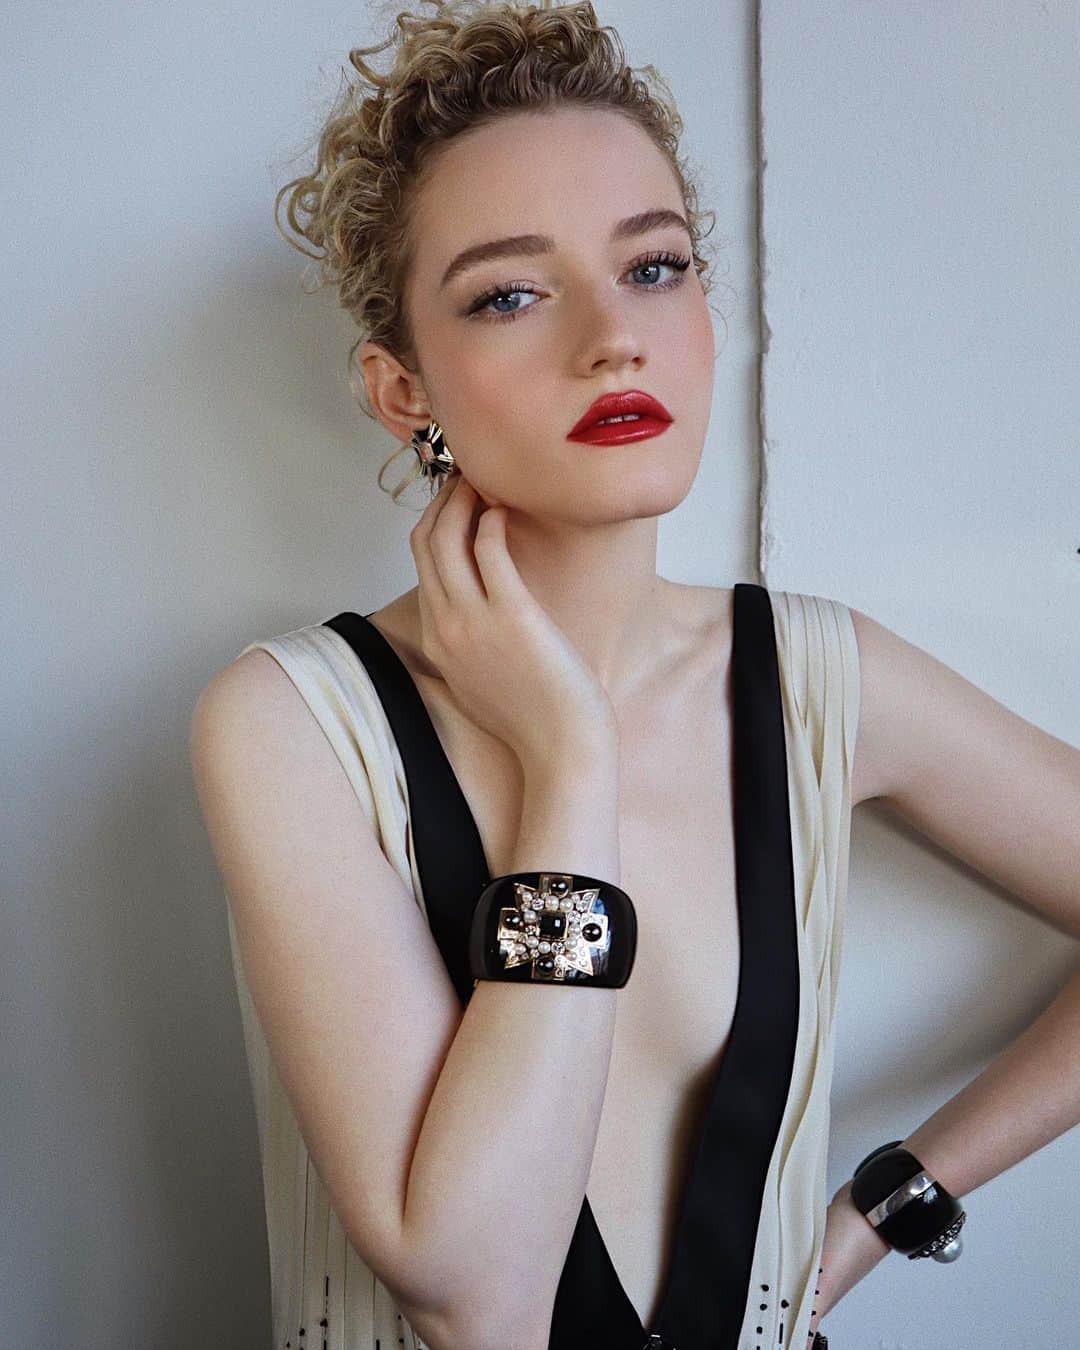 Hung Vanngoさんのインスタグラム写真 - (Hung VanngoInstagram)「#JuliaGarner (@juliagarnerofficial) for the #GoldenGlobes Awards this evening ❤️. Styling  @elizabethsaltzman  Nails @tony748474  Hair @bobbyeliot  Makeup @hungvanngo using @chanel.beauty @welovecoco  #welovecoco #WorkingWithChanel ❤️ Here is a full products breakdown:  SKIN PREP: Hydra Beauty Nourishing Lip Care Hydra Beauty Micro Serum Intense Replenishing Hydration Hydra Beauty Micro Gel Yeux Intense Smoothing Eye Gel Hydra Beauty Micro Creme Fortifying Replenishing Hydration  FACE: Le Beiges Healthy Glow Foundation Hydration and Longwear in shade BR22 Le Correcteur De Chanel Longwear Concealer in shade 10 Le Beiges Healthy Glow Bronzing Cream (Soleil Tan Bronze Universel) Le Beiges Healthy Glow Sheer Powder in shade 20 Baume Essentiel in shade Printanier Fleurs De Printemps Blush and Highlighter Duo  EYEBROWS: Crayon Sourcils in 10 Blond Cendre Le Gel Sourcils in 350 Transparent  EYES: La Base Ombre Q Paupieres Longwear Eyeshadow Primer Ombré Premiere Longwear Cream Shadow in shades 844 Gemme Doree and 840 Patine Bronze Stylo Yeux Waterproof Long Lasting Eyeliner in shade 932 Noir Petrole Le Volume De Chanel Mascara in shade 10 Noir  LIPS Rouge CoCo Bloom in shade 134 Sunlight (Waitlist is now open on redcarpeybeauty.Chanel.com! ❤️)」3月1日 9時12分 - hungvanngo